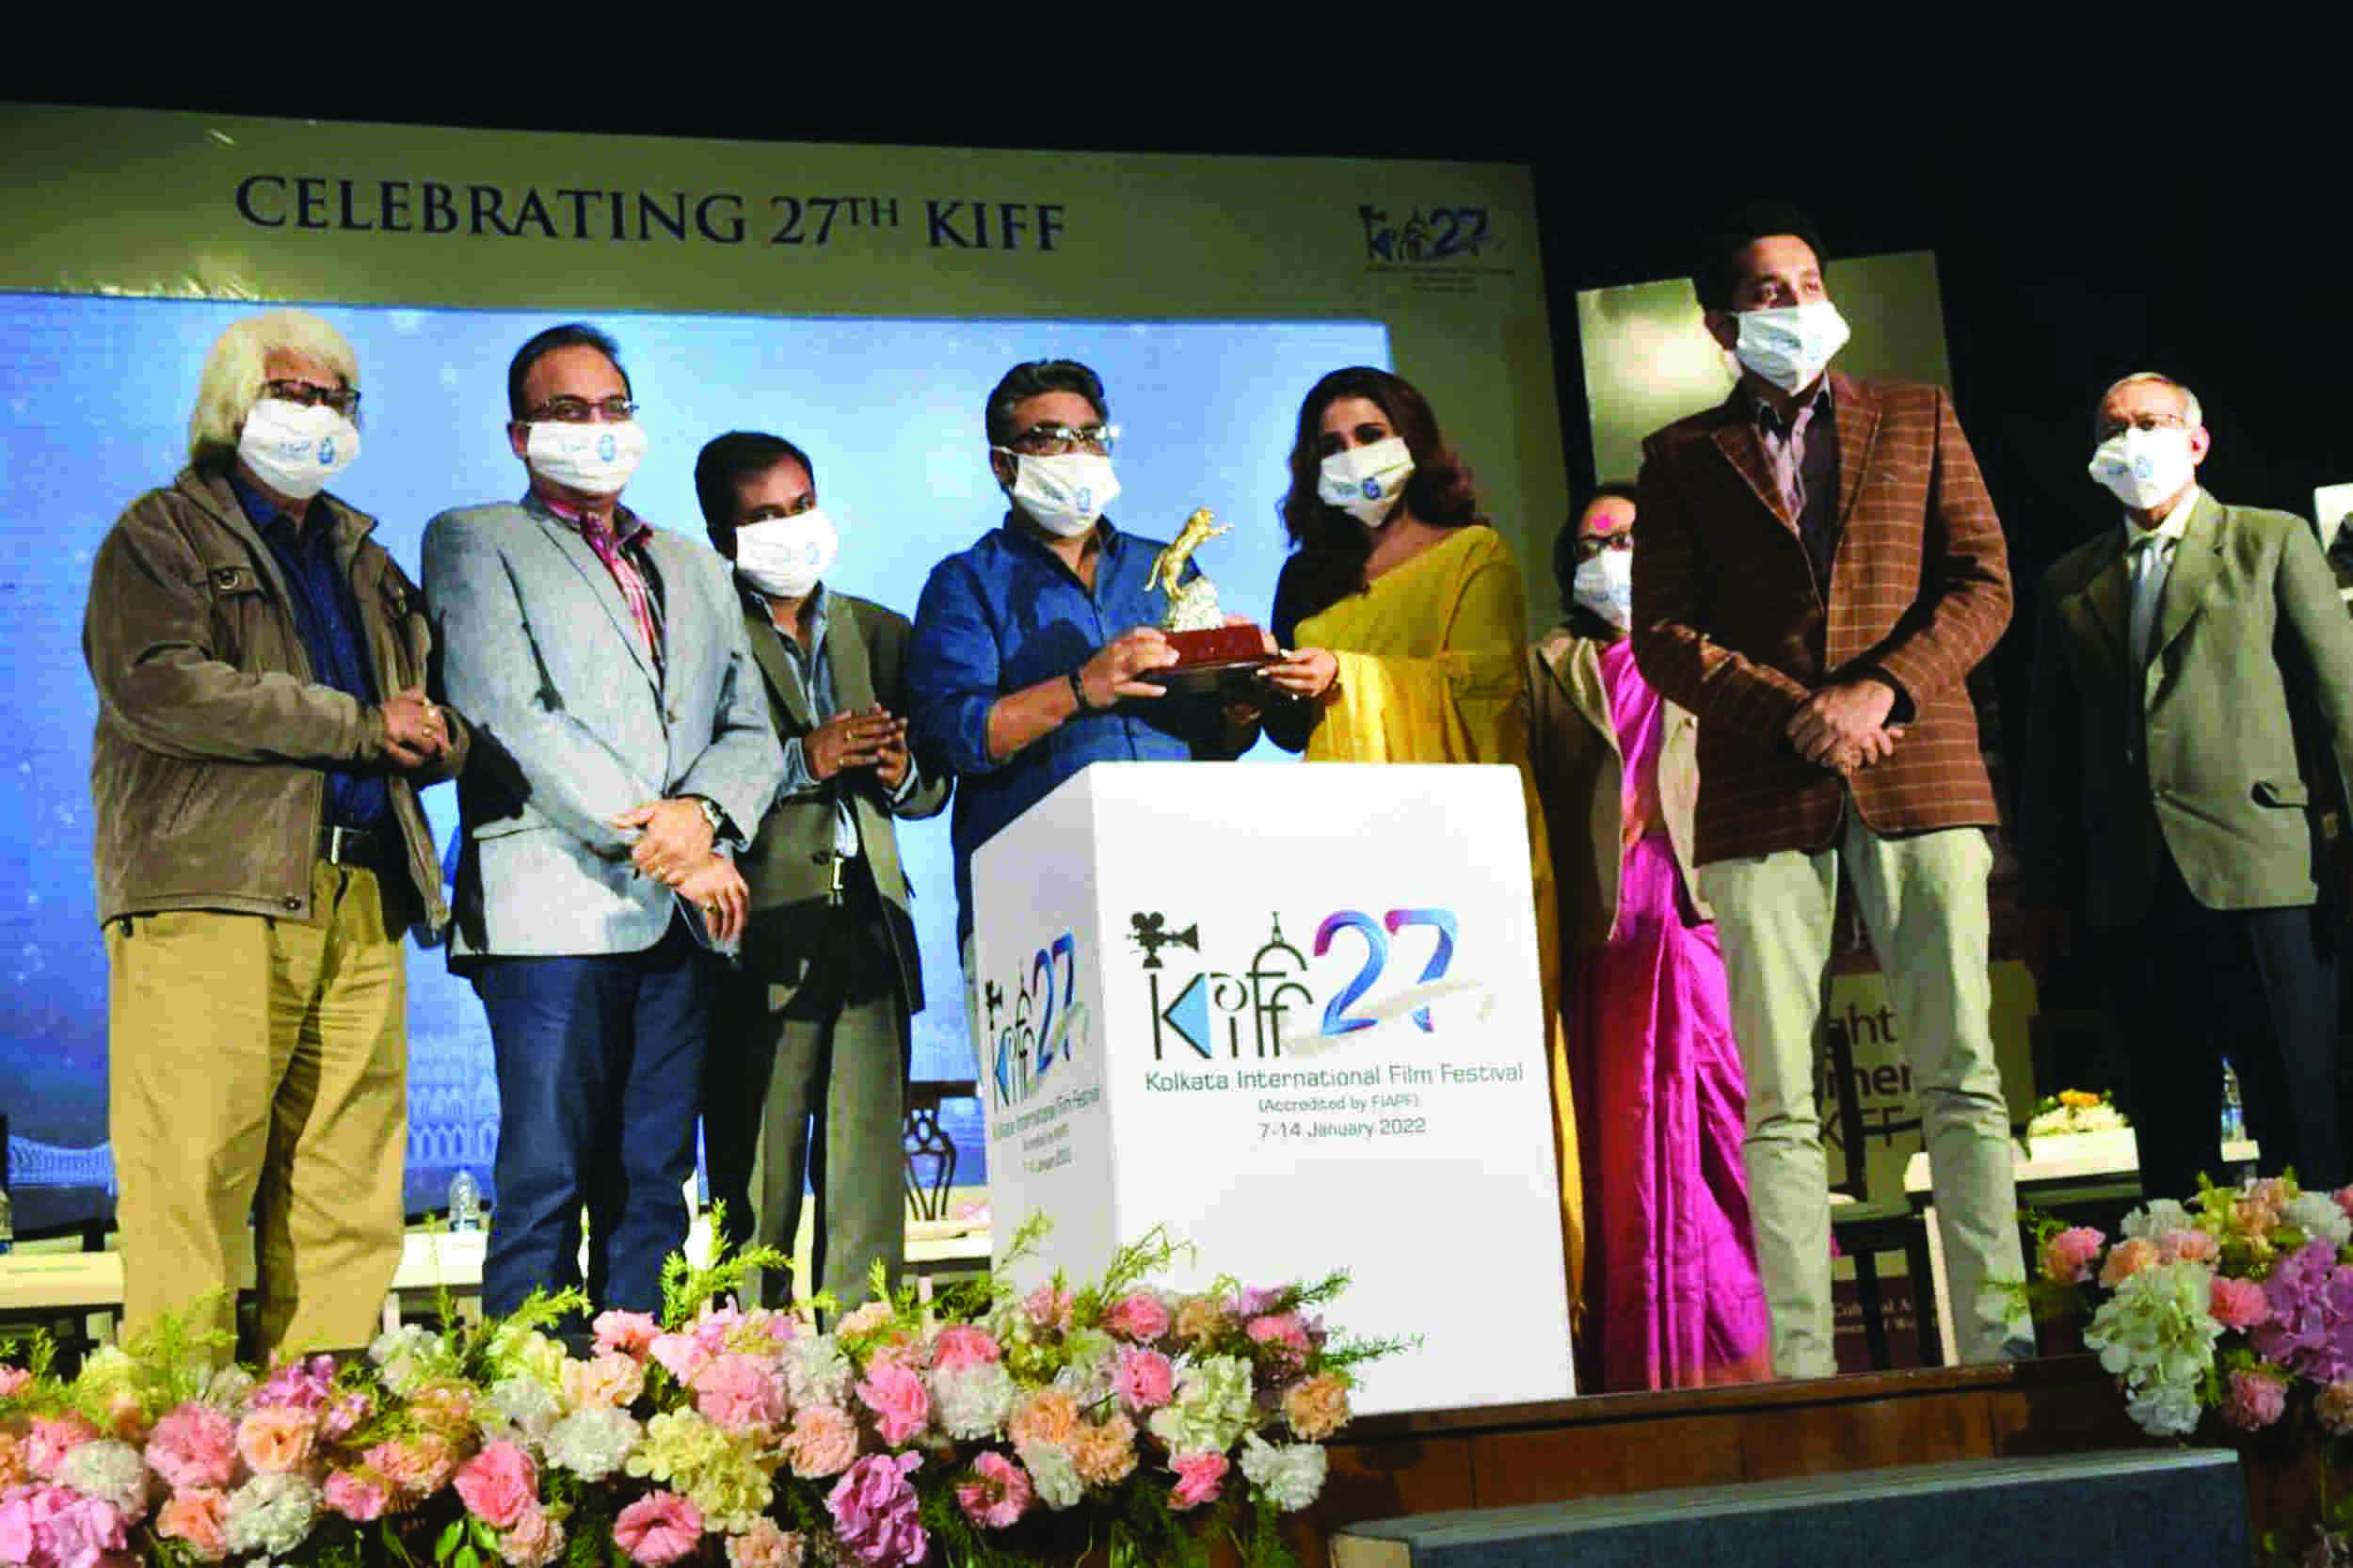 27th KIFF: About 27 Living artistes who worked with Satyajit Ray to be felicitated